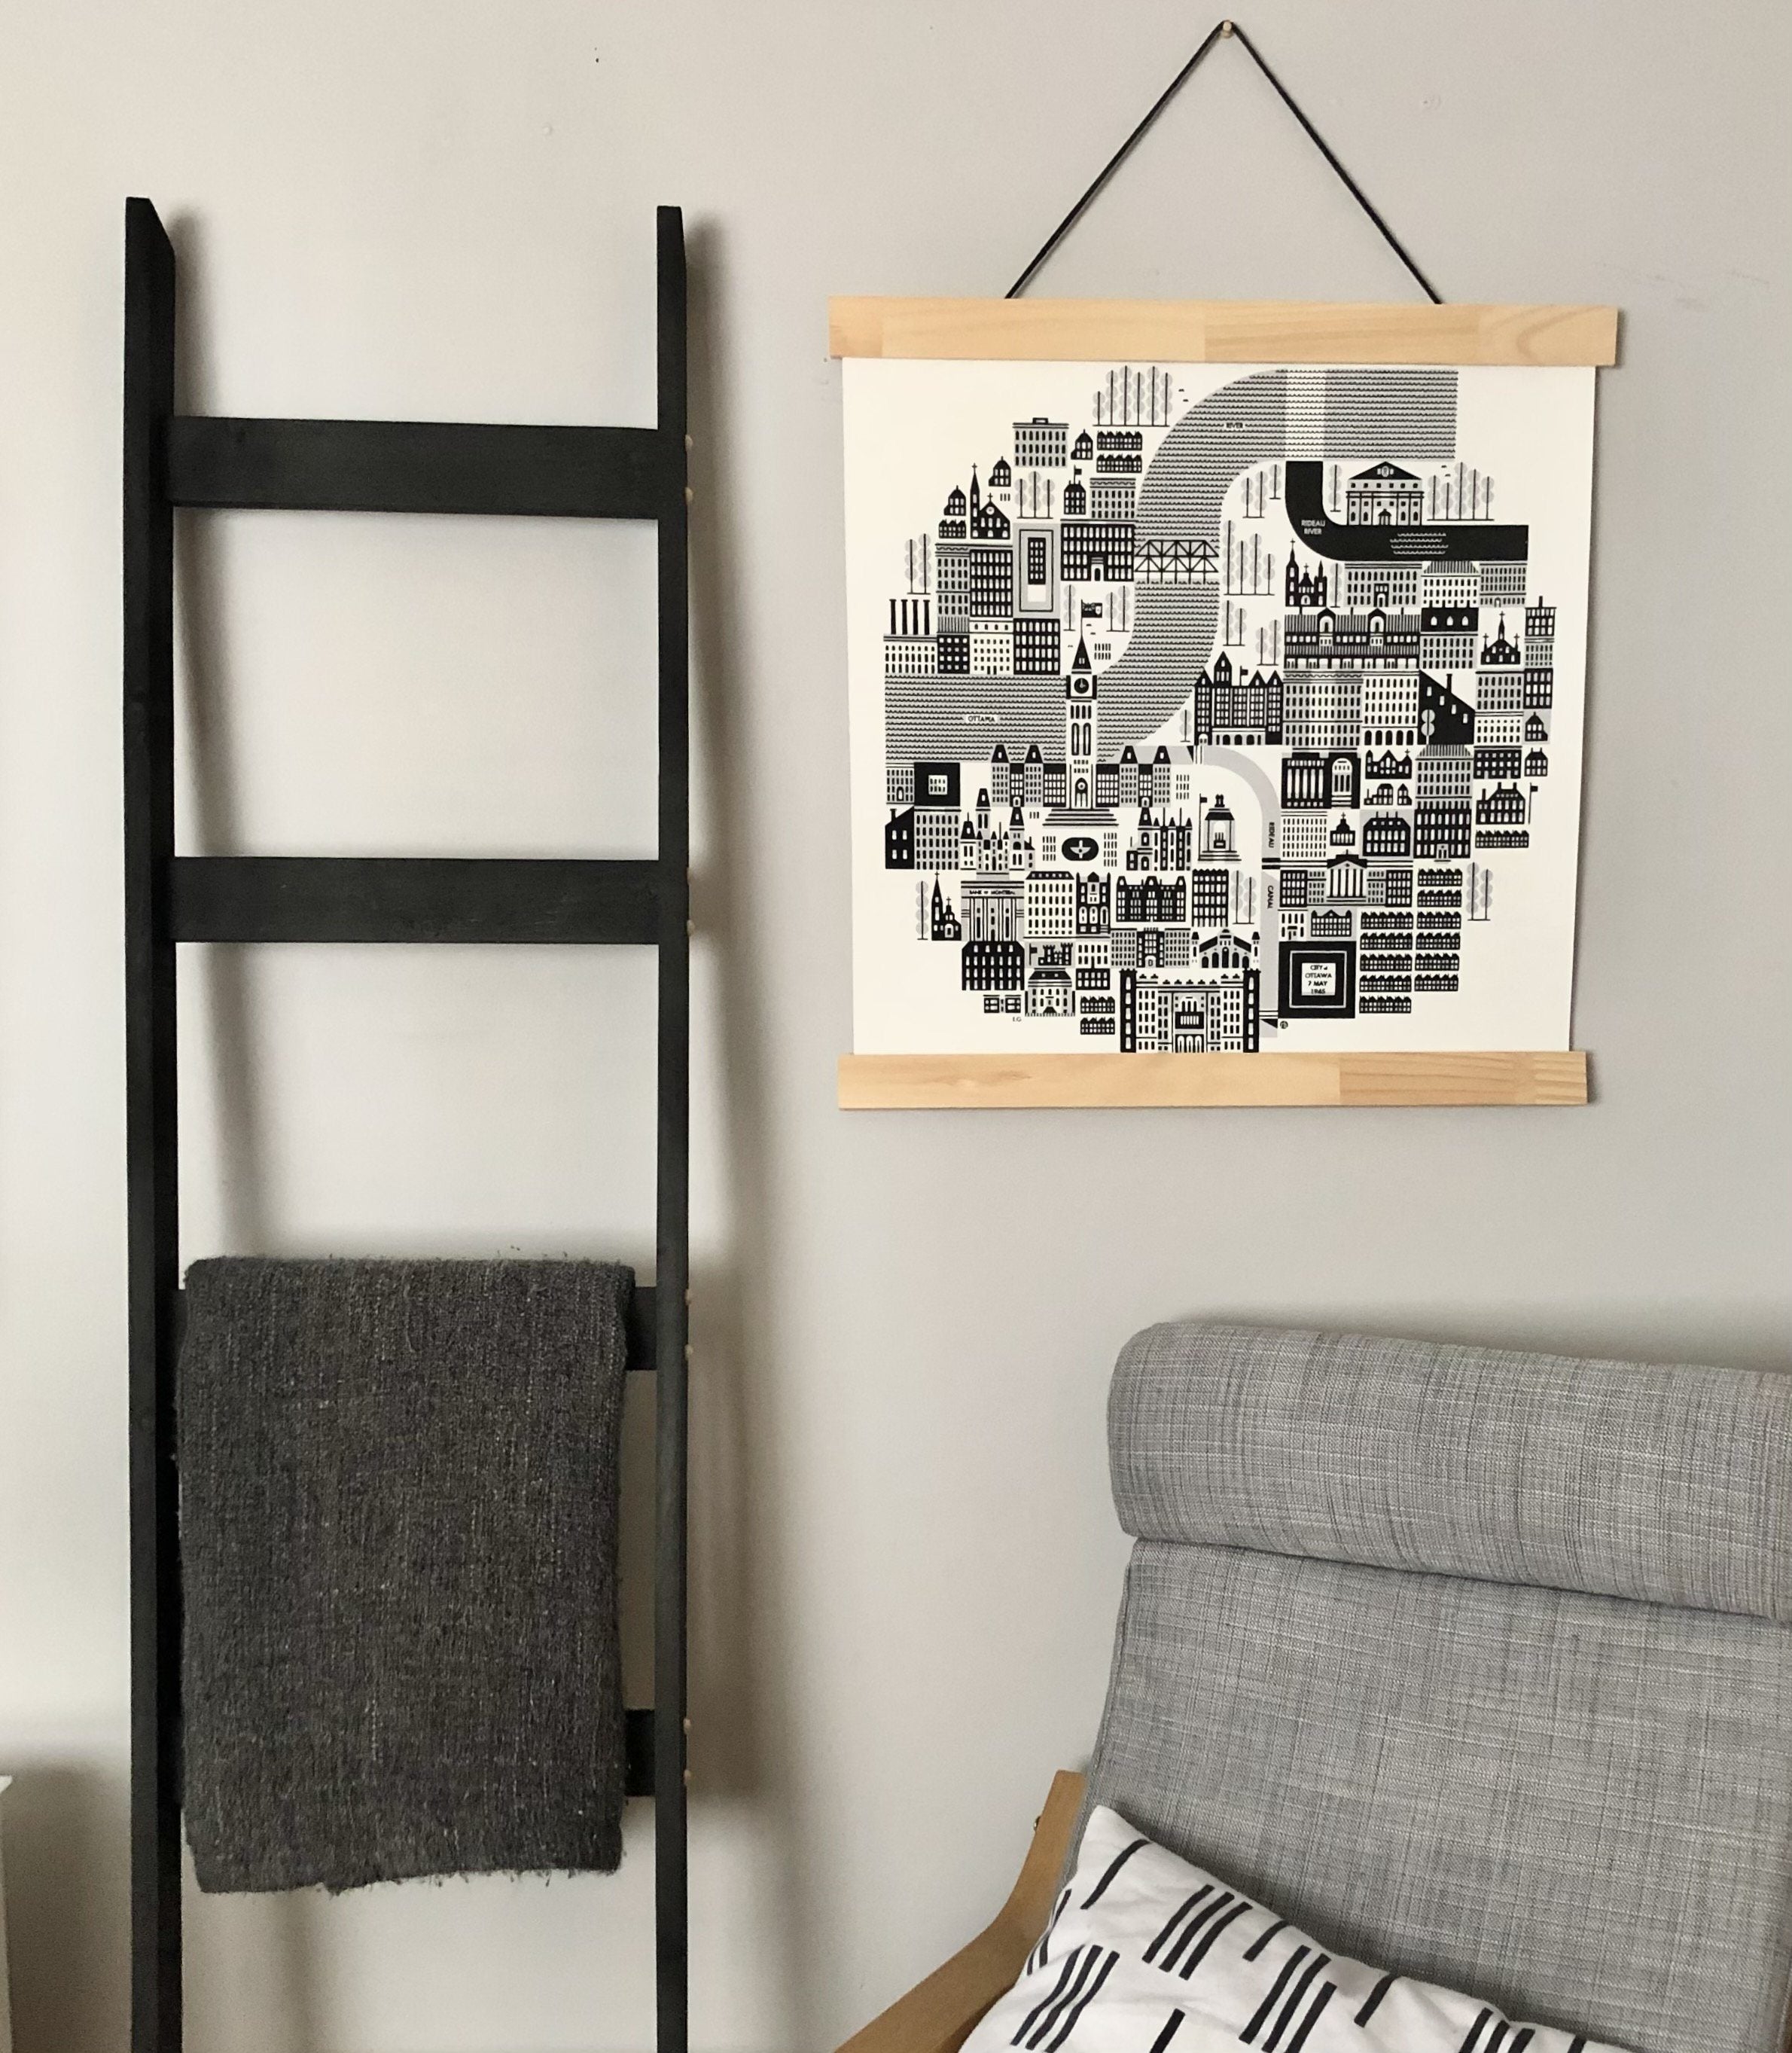 6ft Blanket Ladder in BLACK Stain Project Pine Designs 